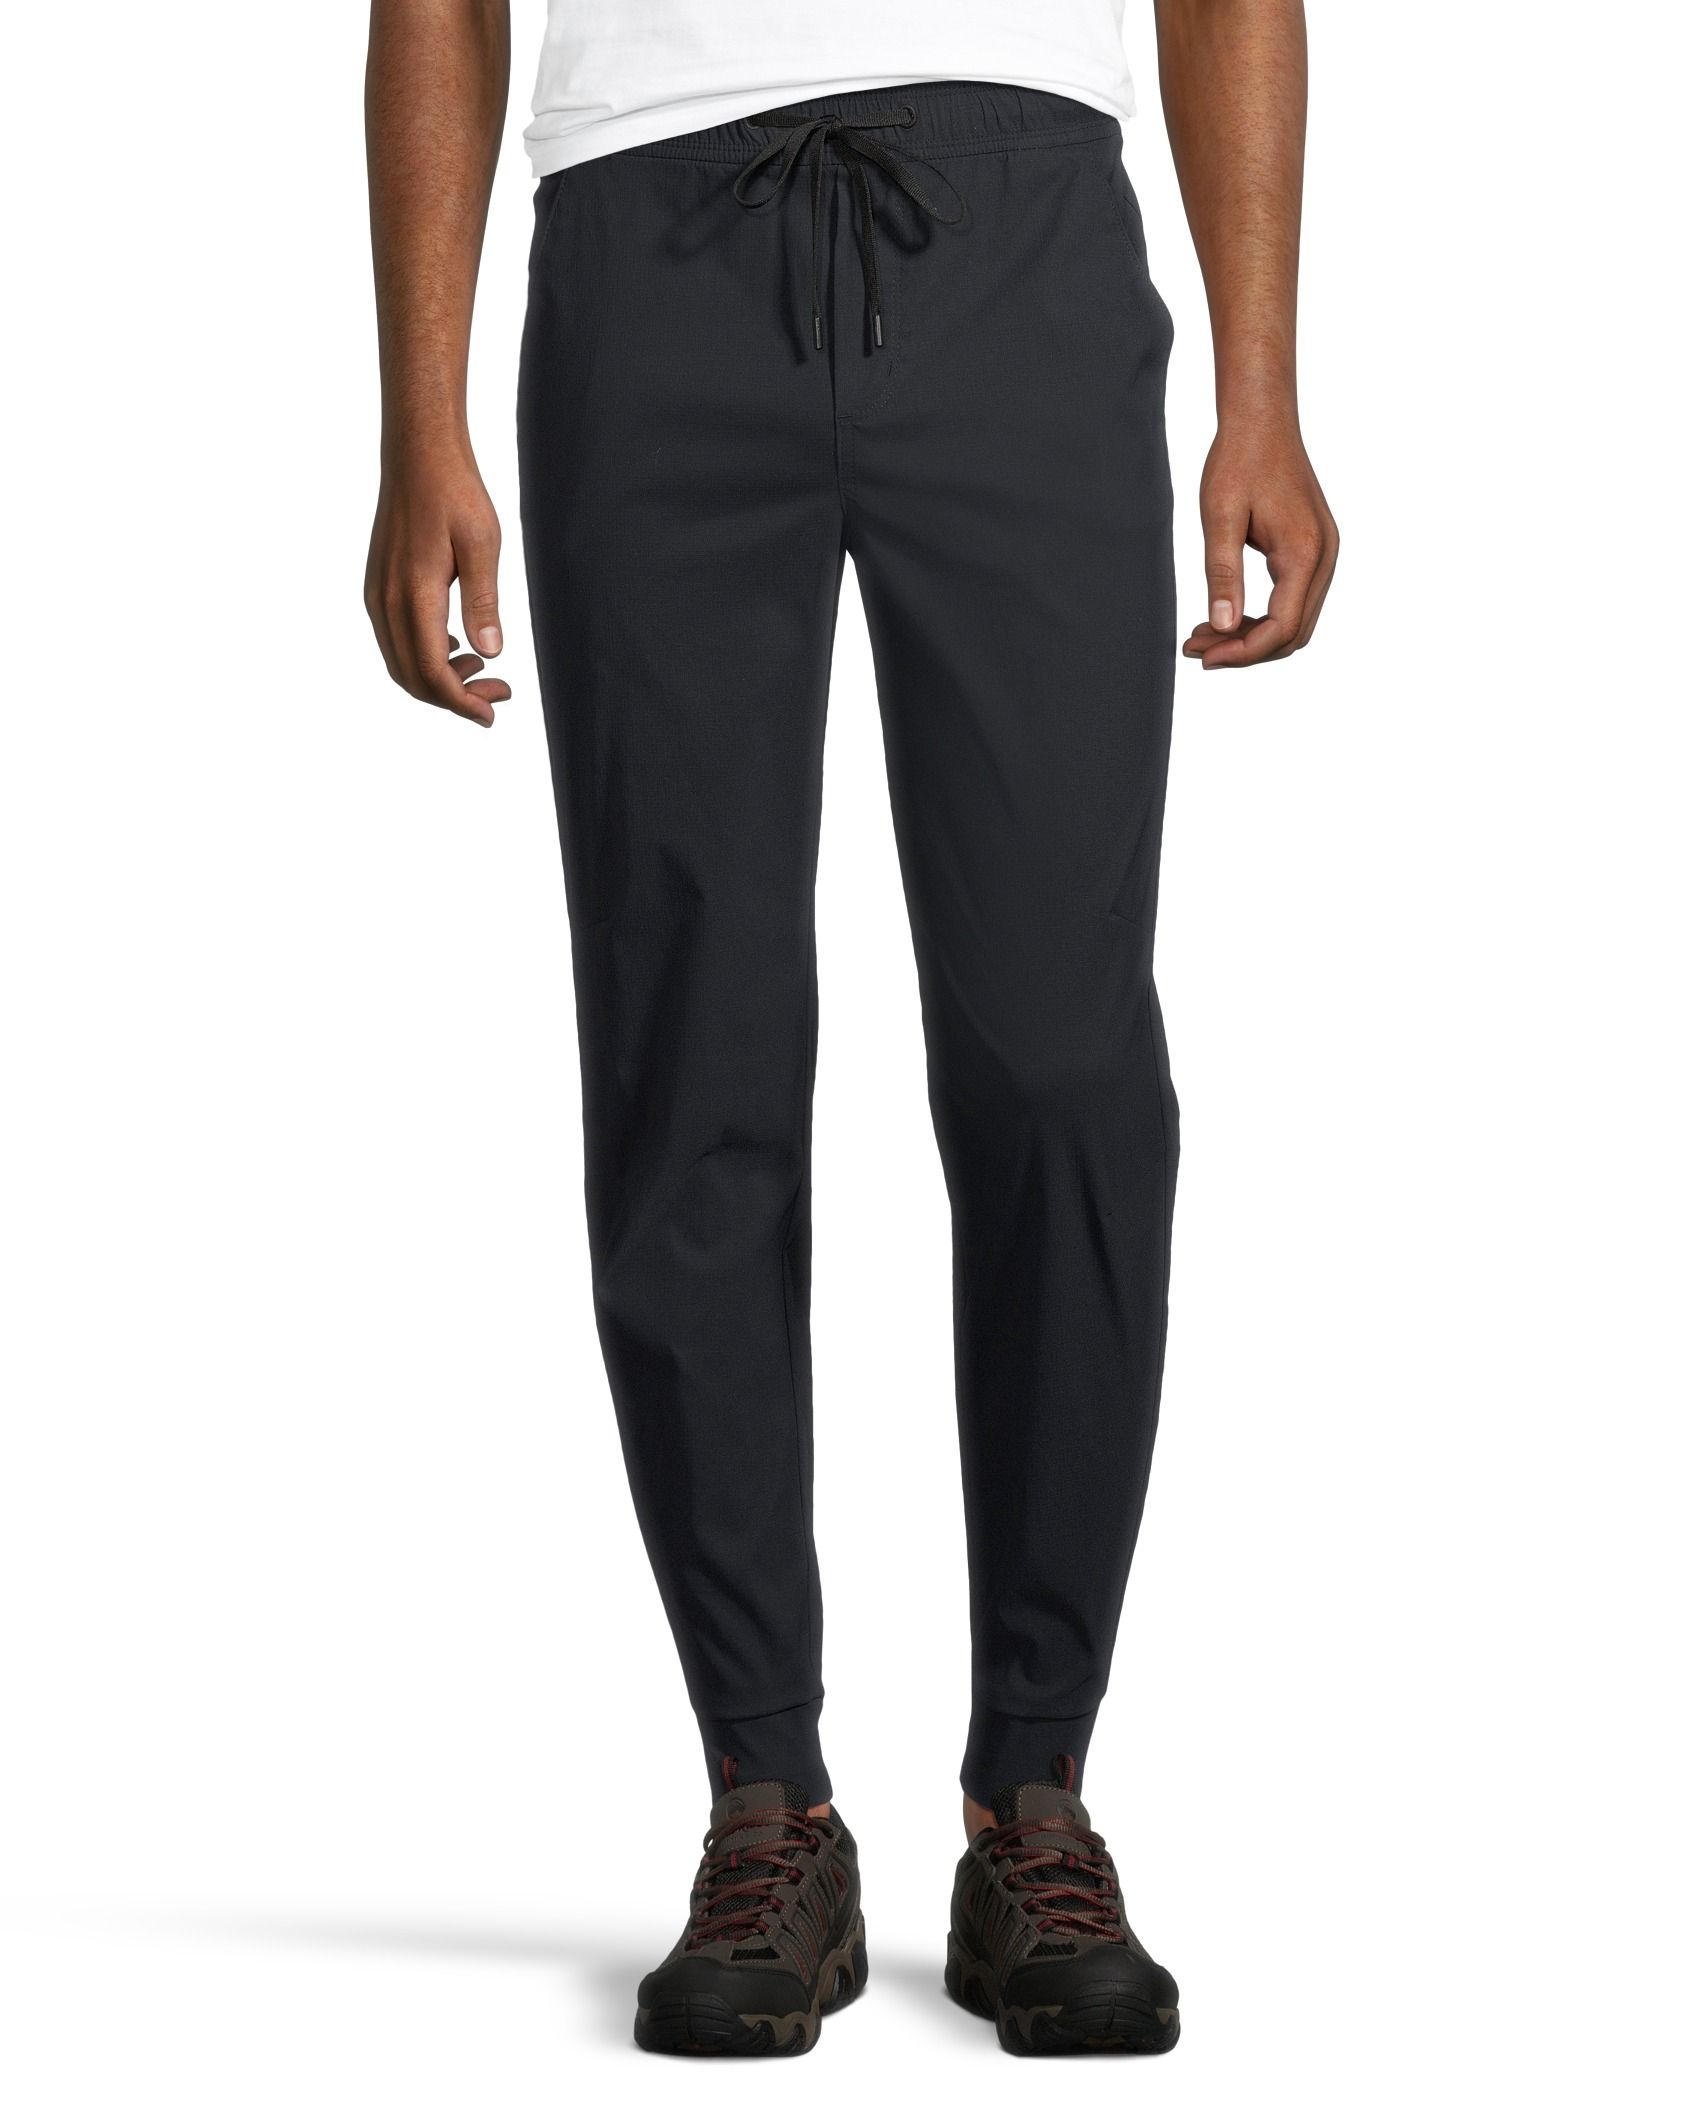 WindRiver Men's Stretch Ripstop Jogger Pants